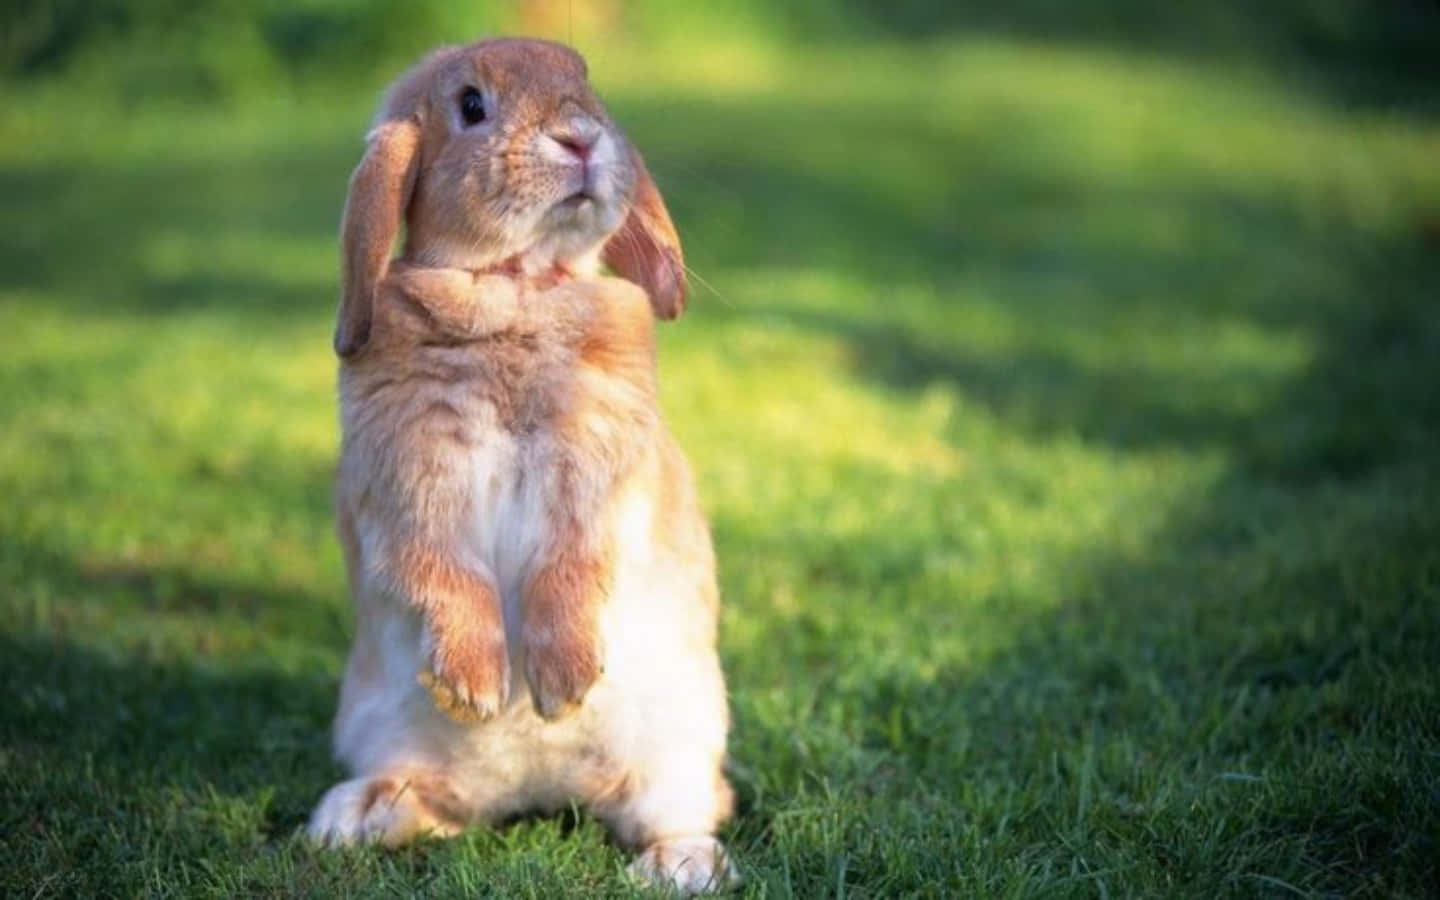 Funny Curious Bunny Picture Lawn